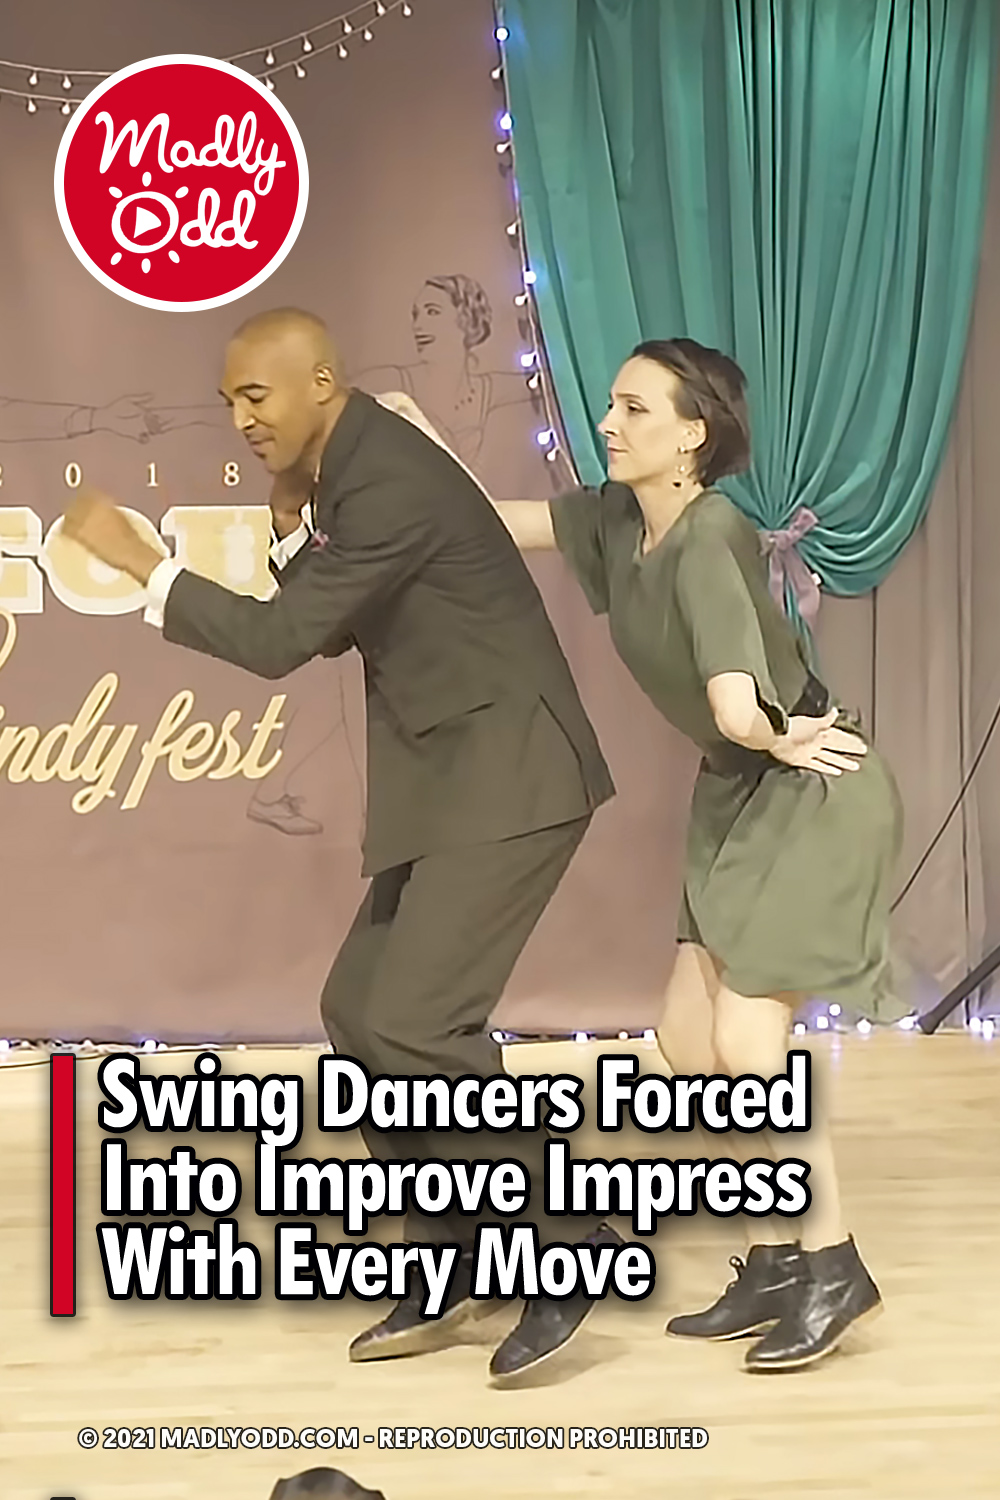 Swing Dancers Forced Into Improve Impress With Every Move